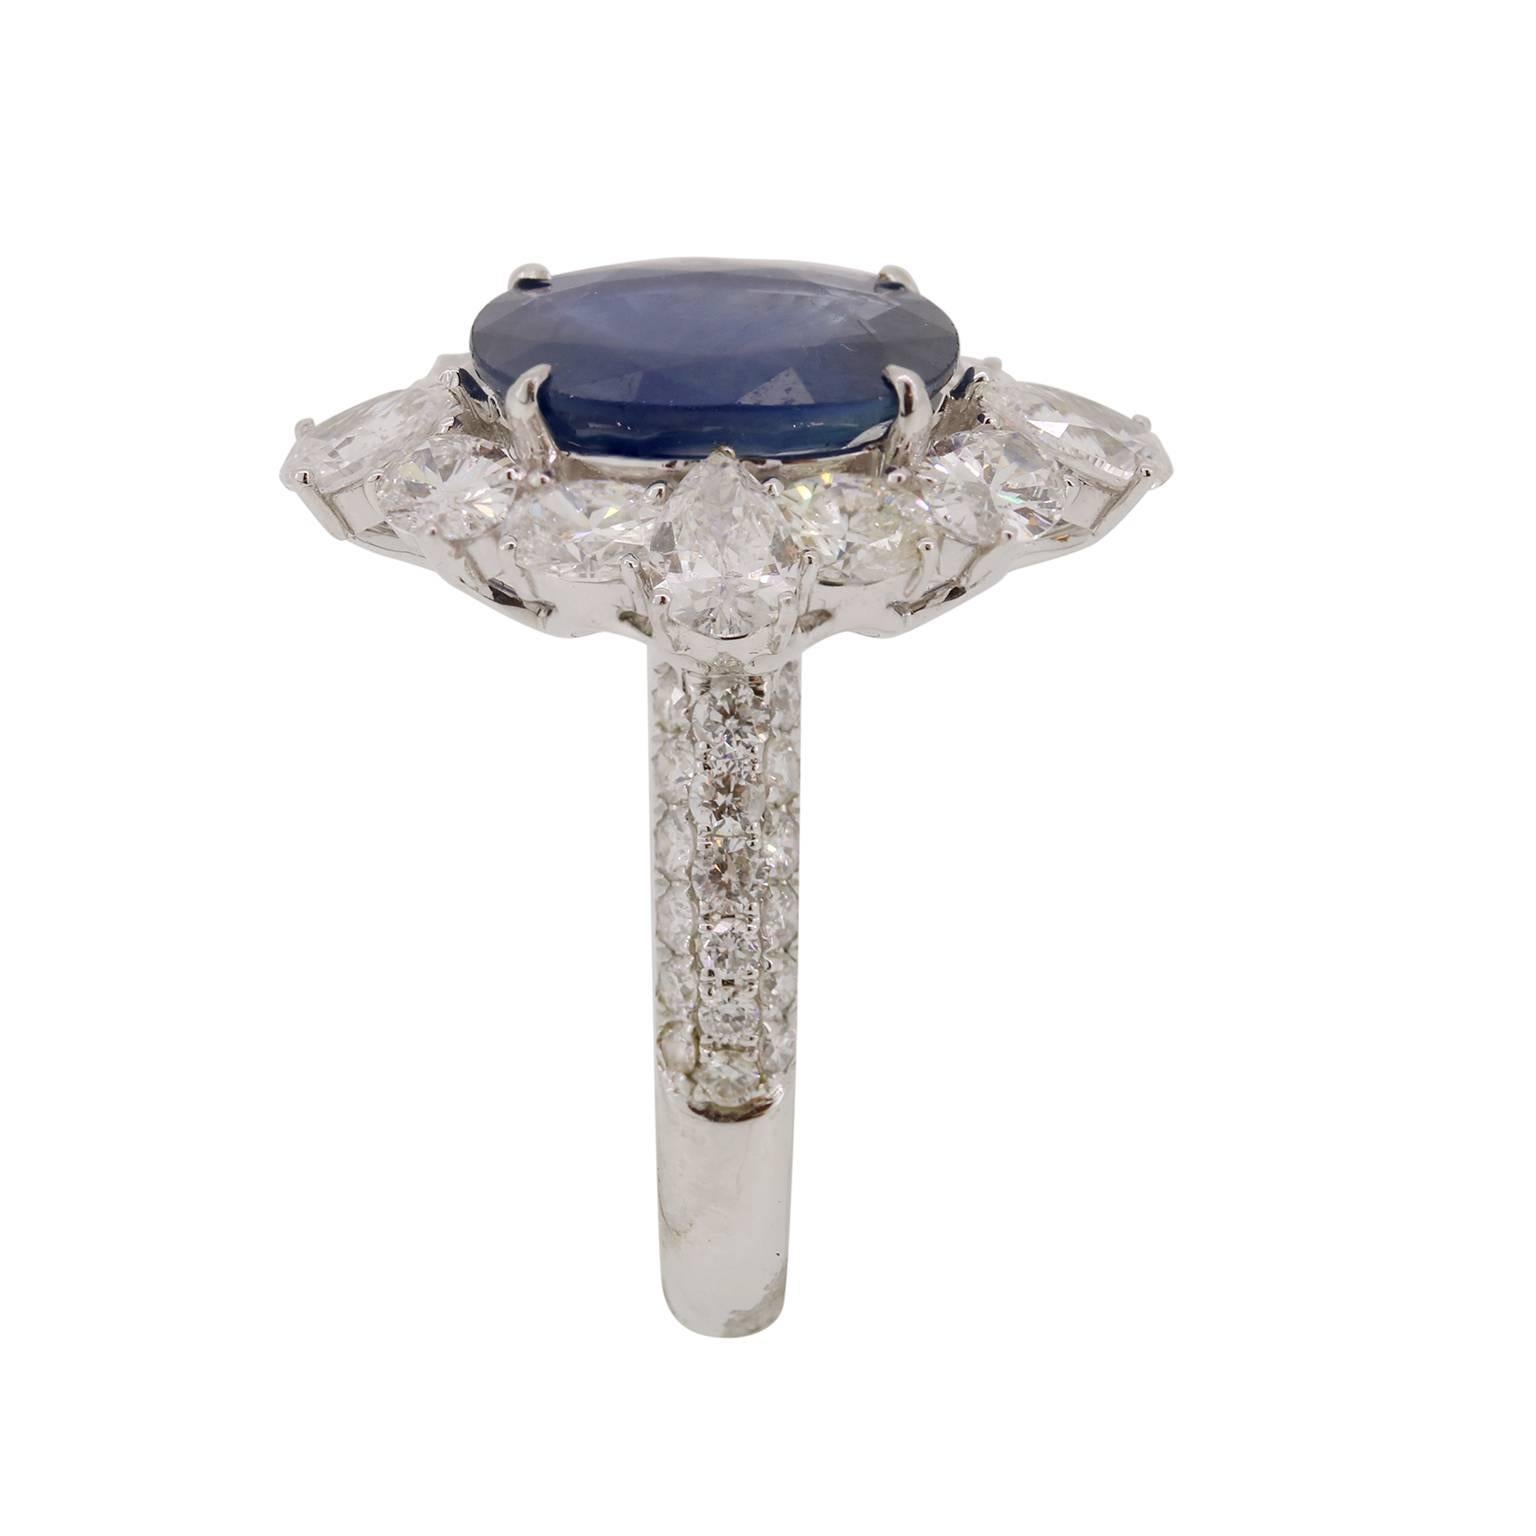 This exquisite 4.25 carat oval Blue Sapphire is surrounded by 0.84 carats of pear and 1.50 carats of oval cut diamonds.  White Diamond pave is then followed down the ring shank to complete this regal ring. 

Size 7, please contact if sizing is